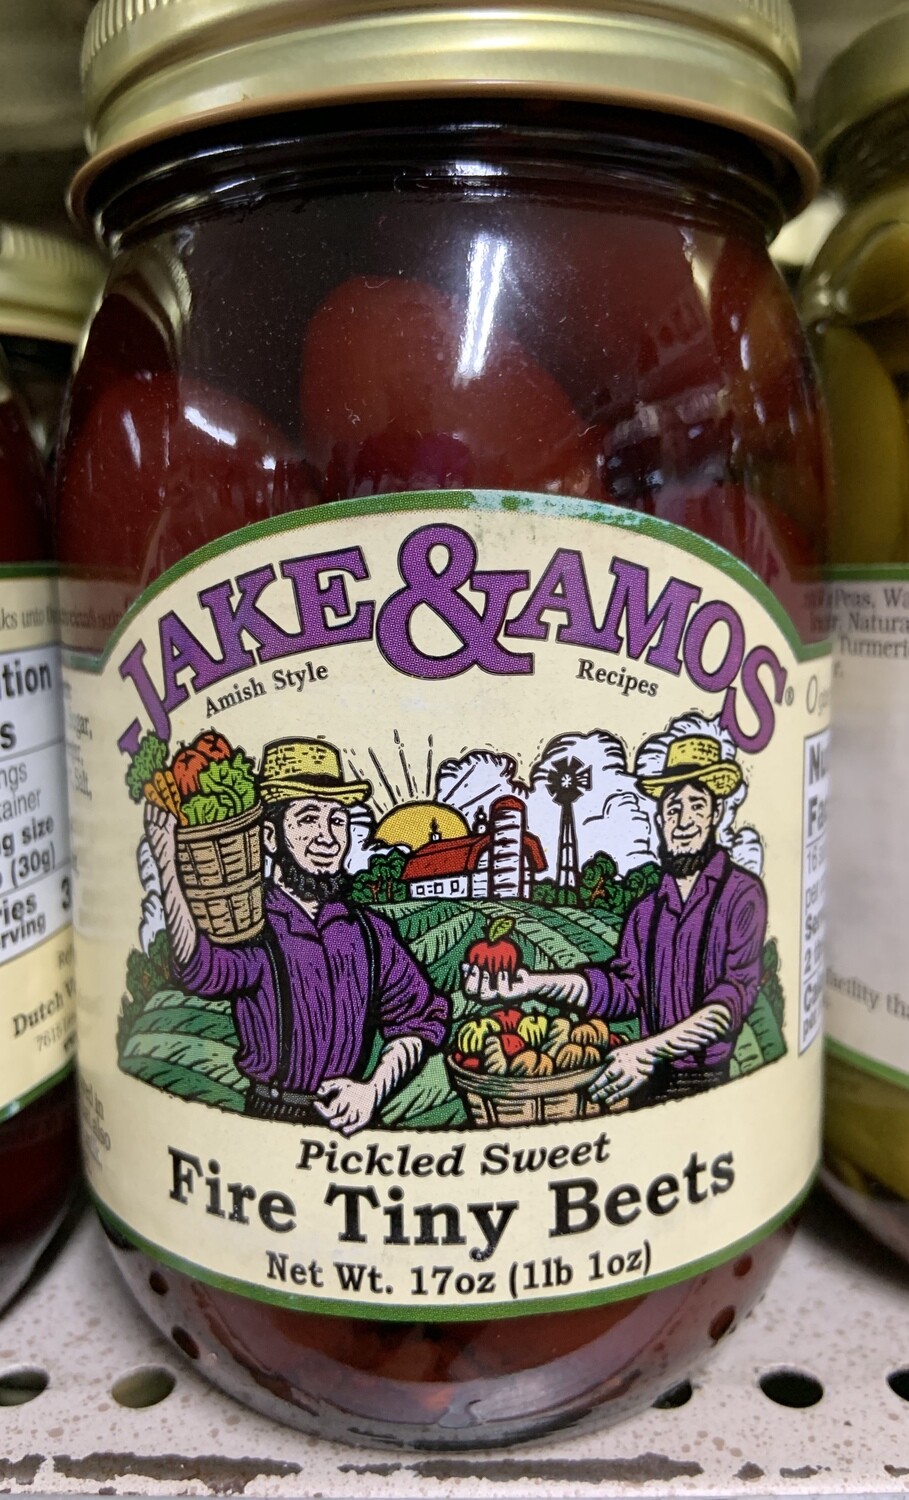 Jake & Amos Pickled Sweet Fire Tiny Beets